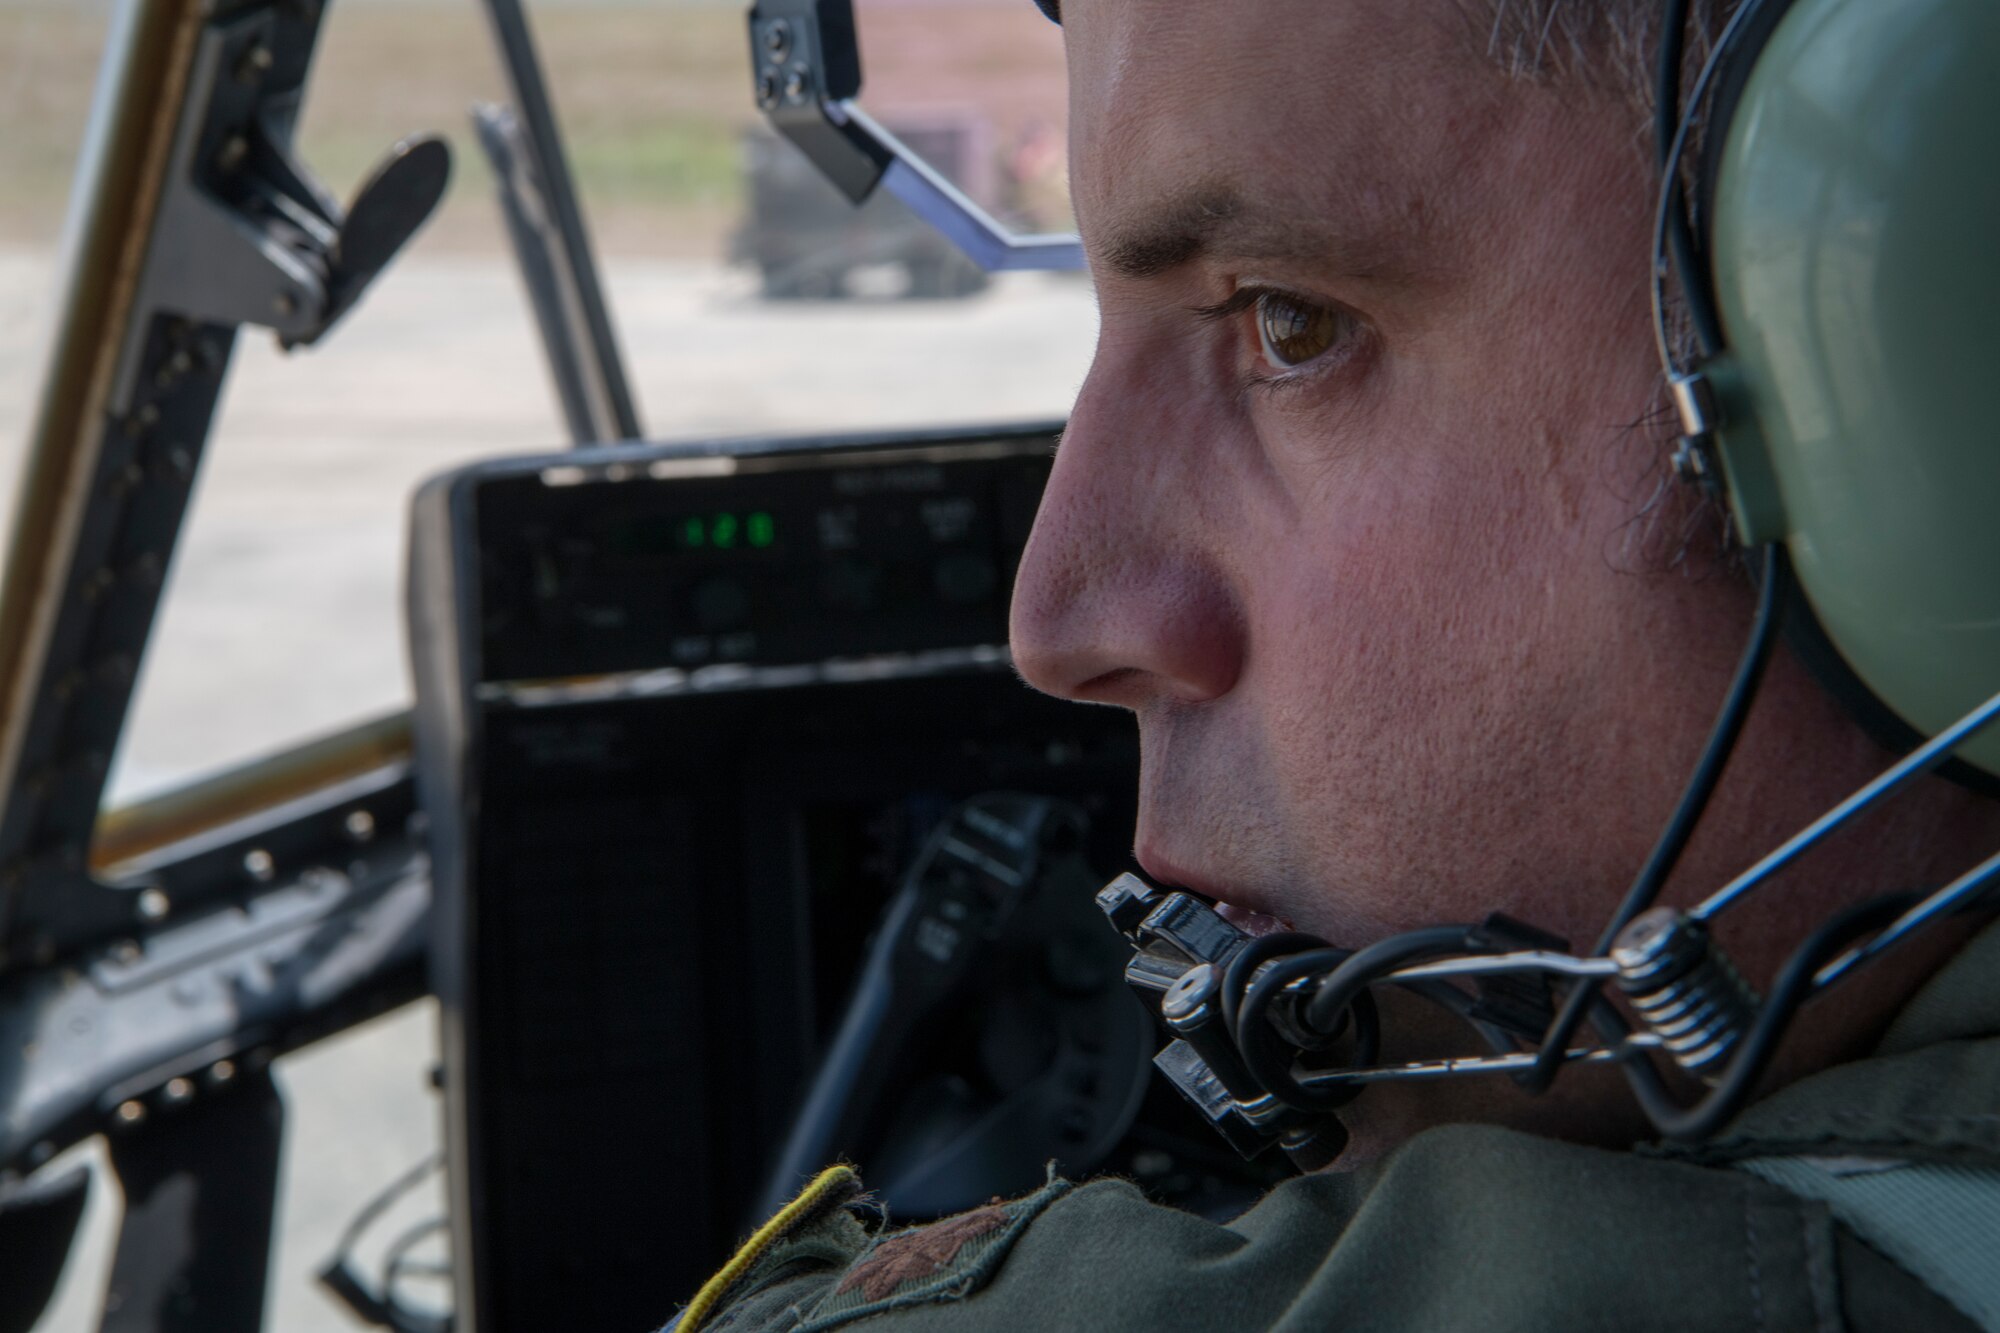 Maj. Brandon Roth, 53rd Weather Reconnaissance Squadron pilot, watches a spotter as he backs up the WC-130J Super Hercules aircraft, June 17, at Saint Croix, U.S. Virgin Islands. The Hurricane Hunters deployed to St. Croix to fly training missions over the Caribbean in preparation for the 2020 hurricane season. (U.S. Air Force photo by Tech. Sgt. Christopher Carranza)